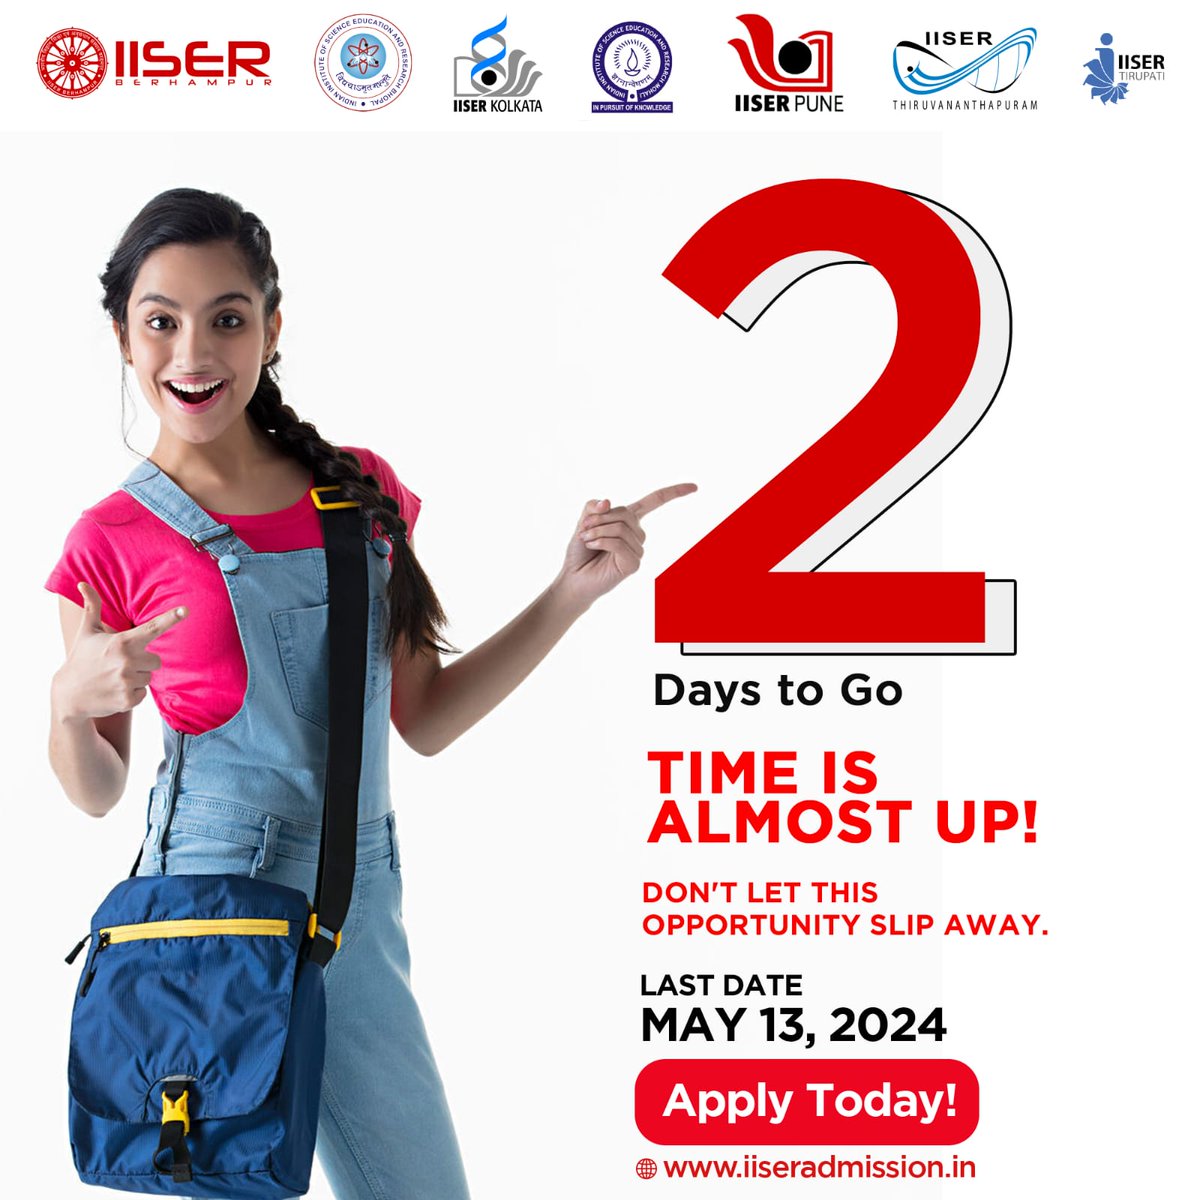 Only 2 days left! 
Secure your spot in the IISER Aptitude Test now to unlock a future of scientific exploration and academic success. Submit your application today and take the first step towards a bright and fulfilling future.
Visit iiseradmission.in to learn more.   
#IAT